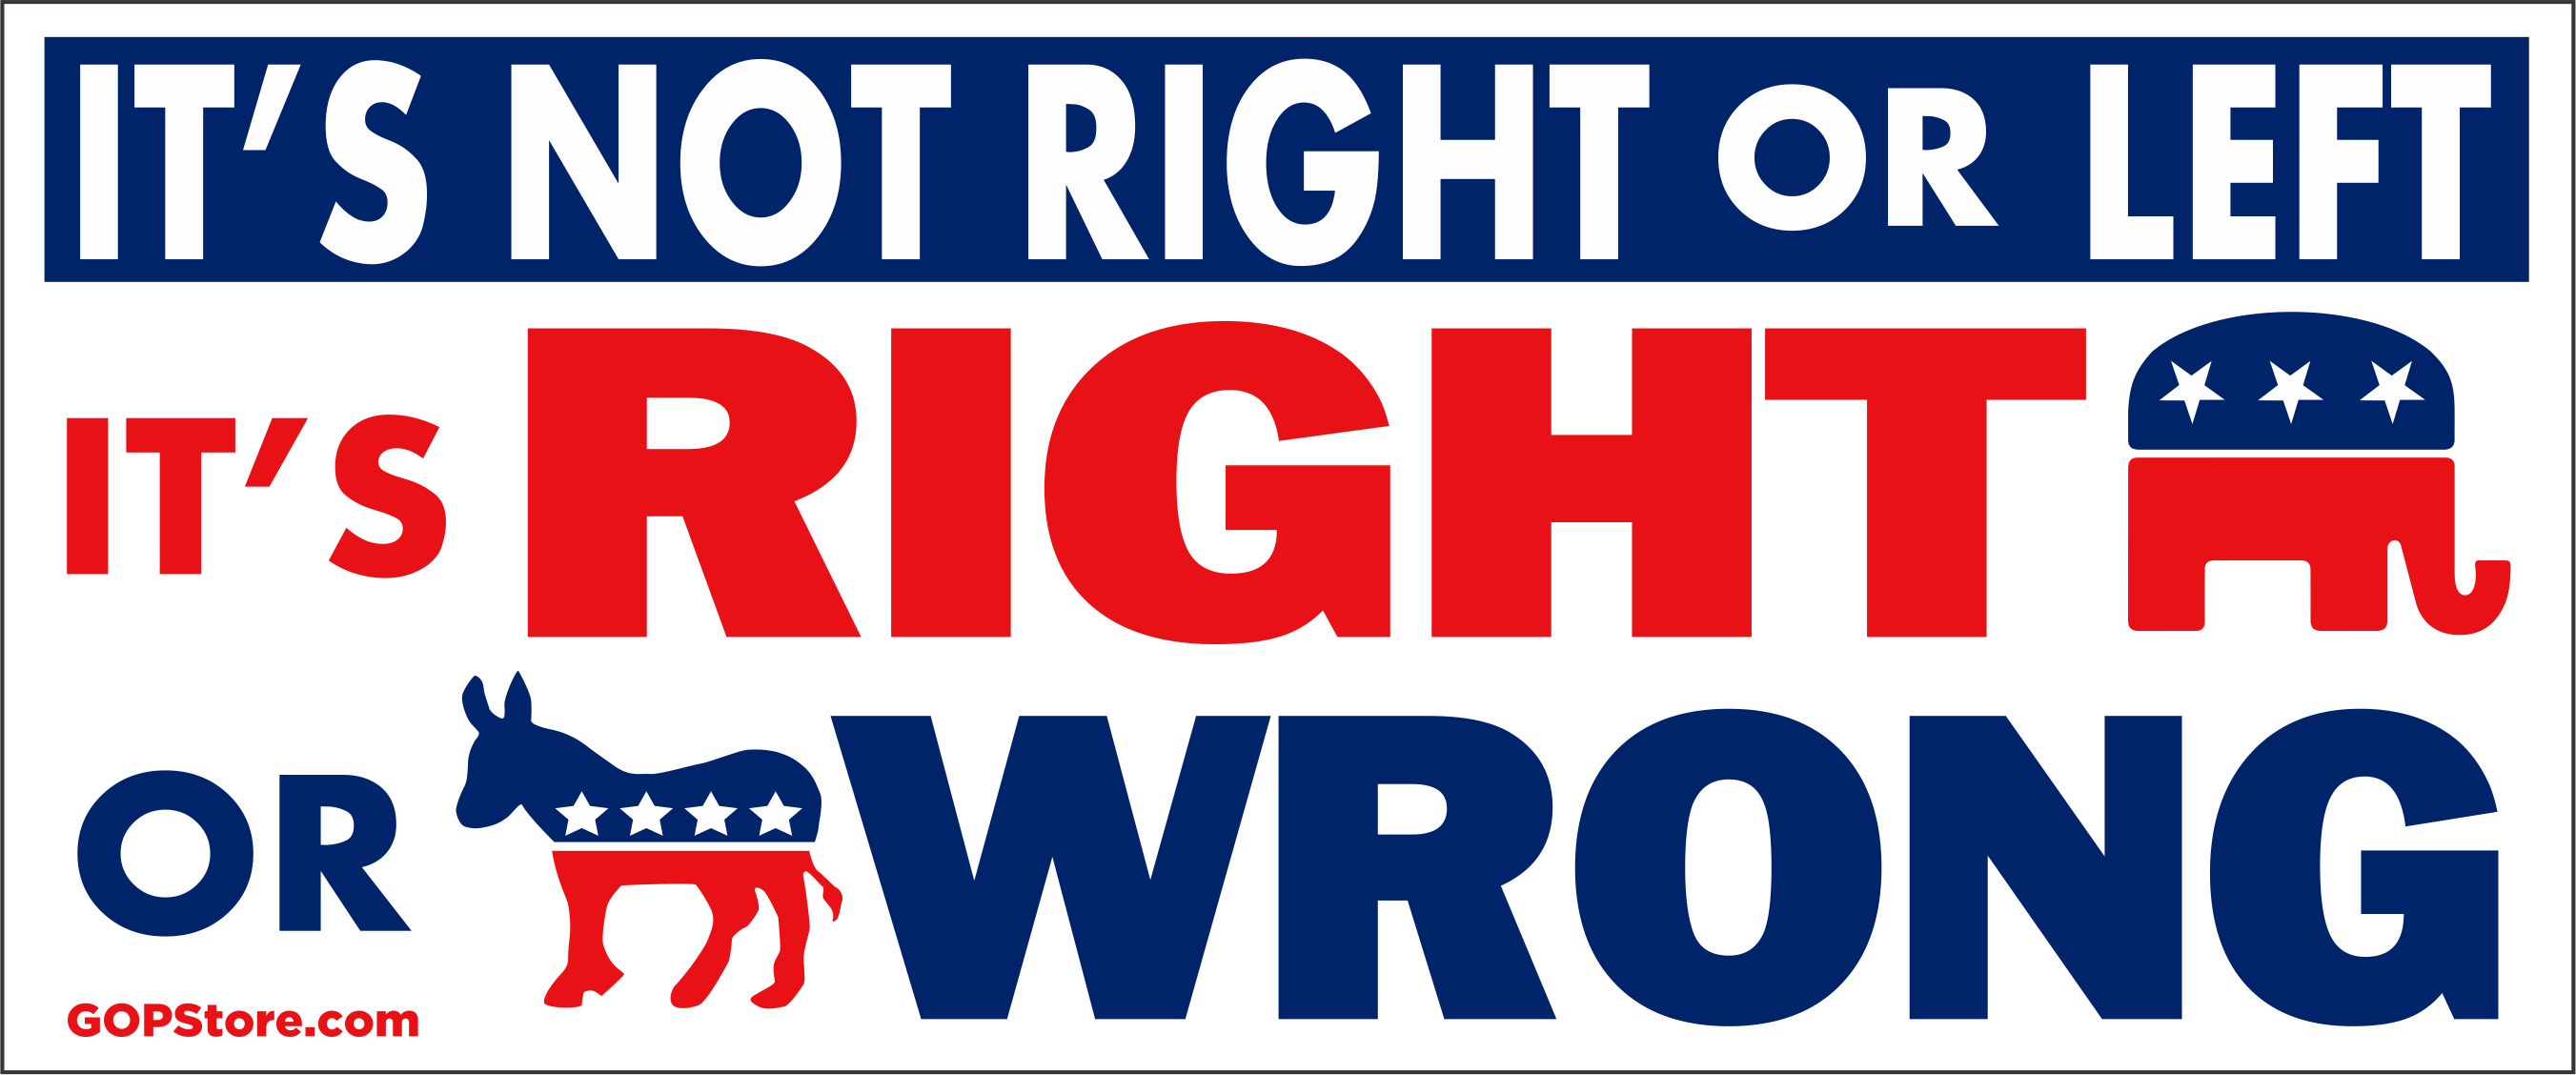 Right or Wrong Sticker